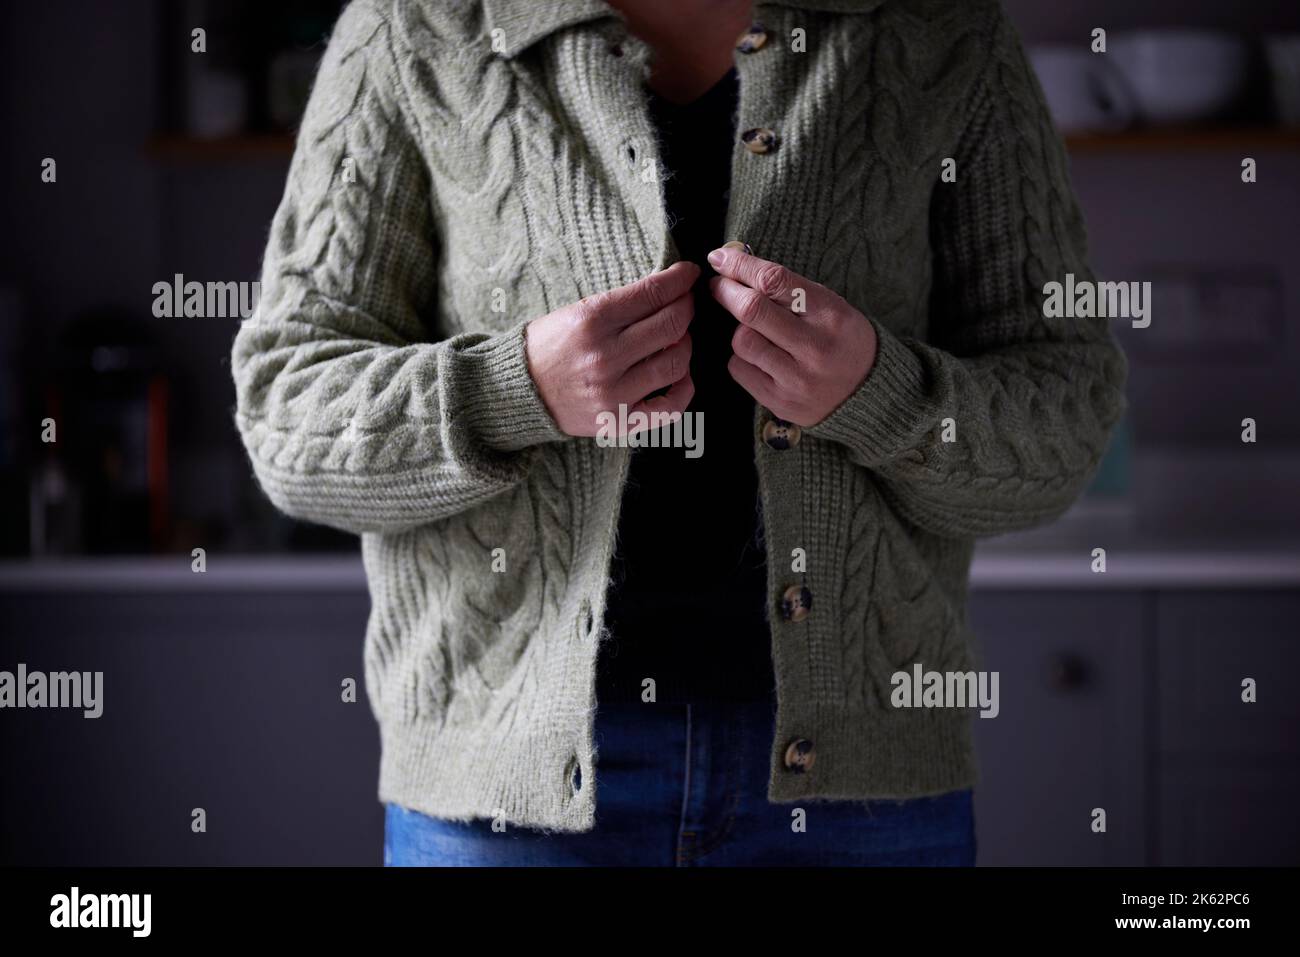 Woman Putting On Extra Jumper Clothing Trying To Keep Warm During Cost Of Living Energy Crisis Stock Photo